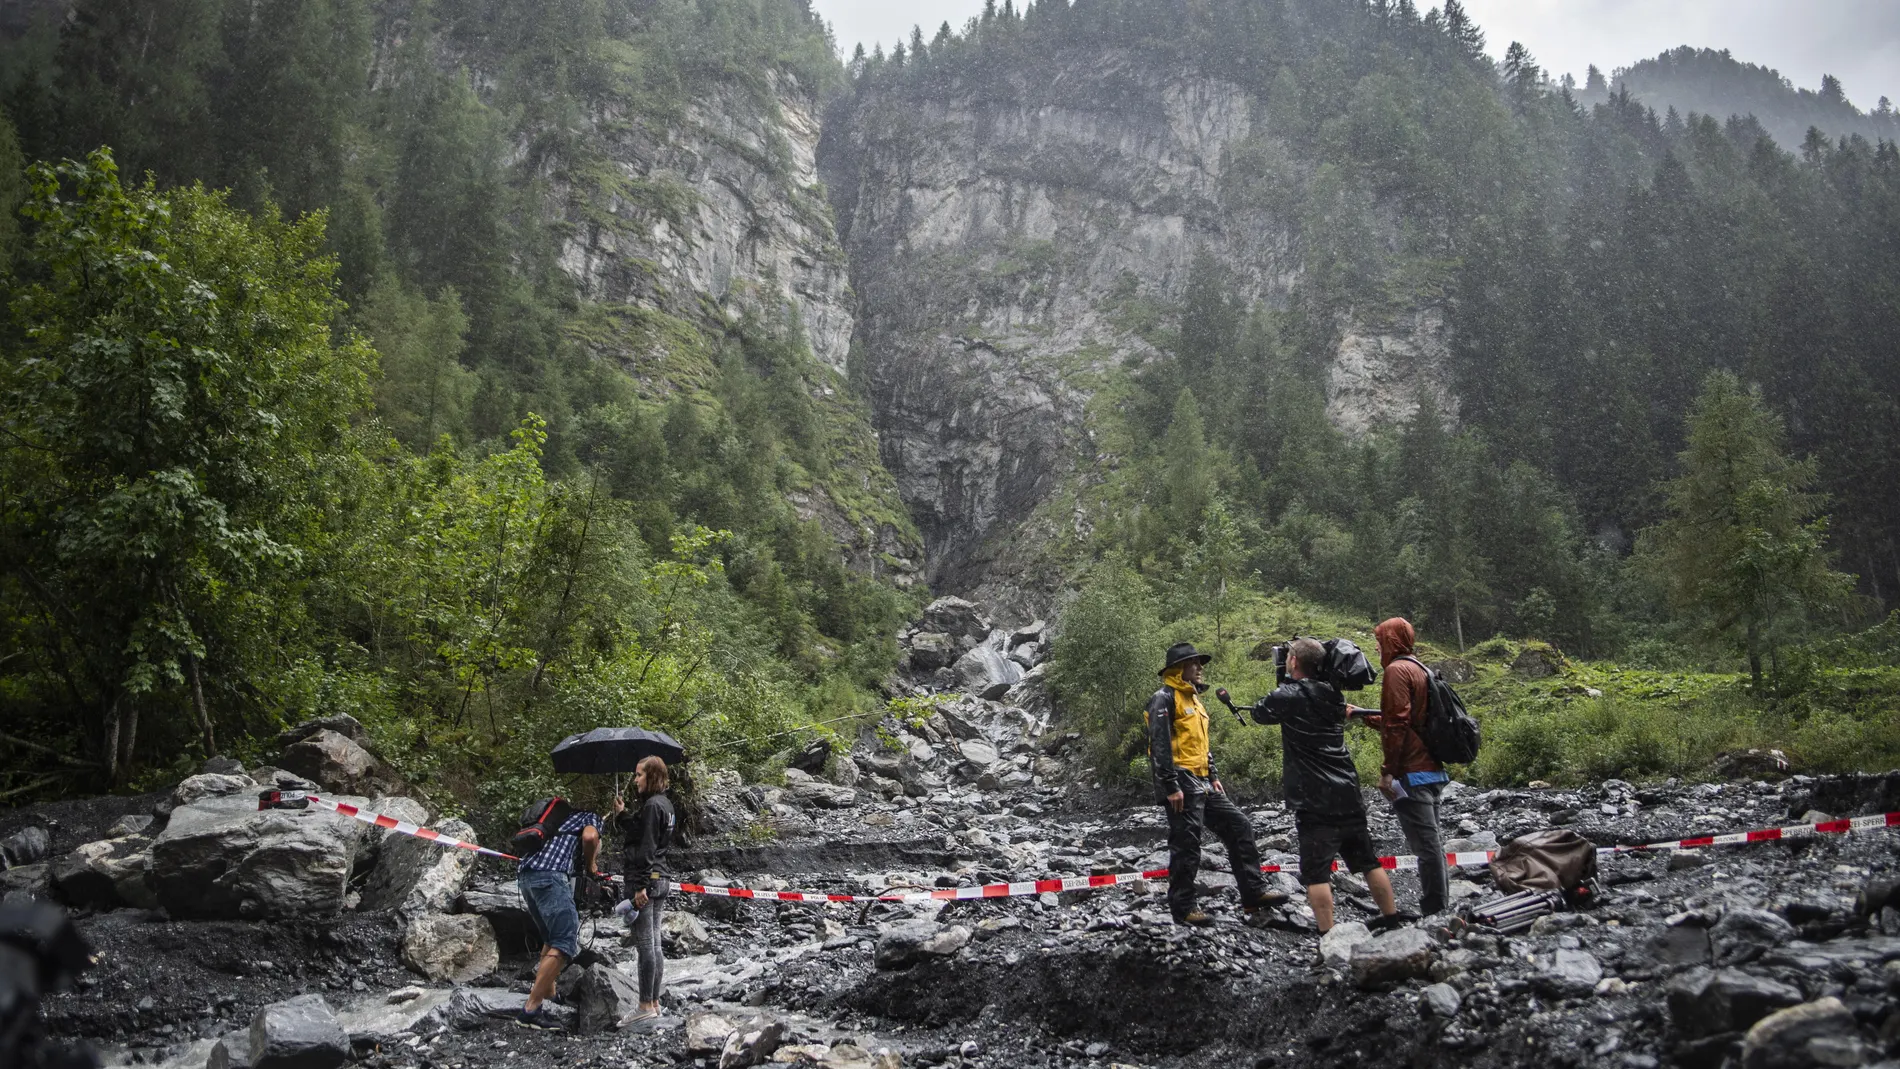 Canyoning accident in Vaettis